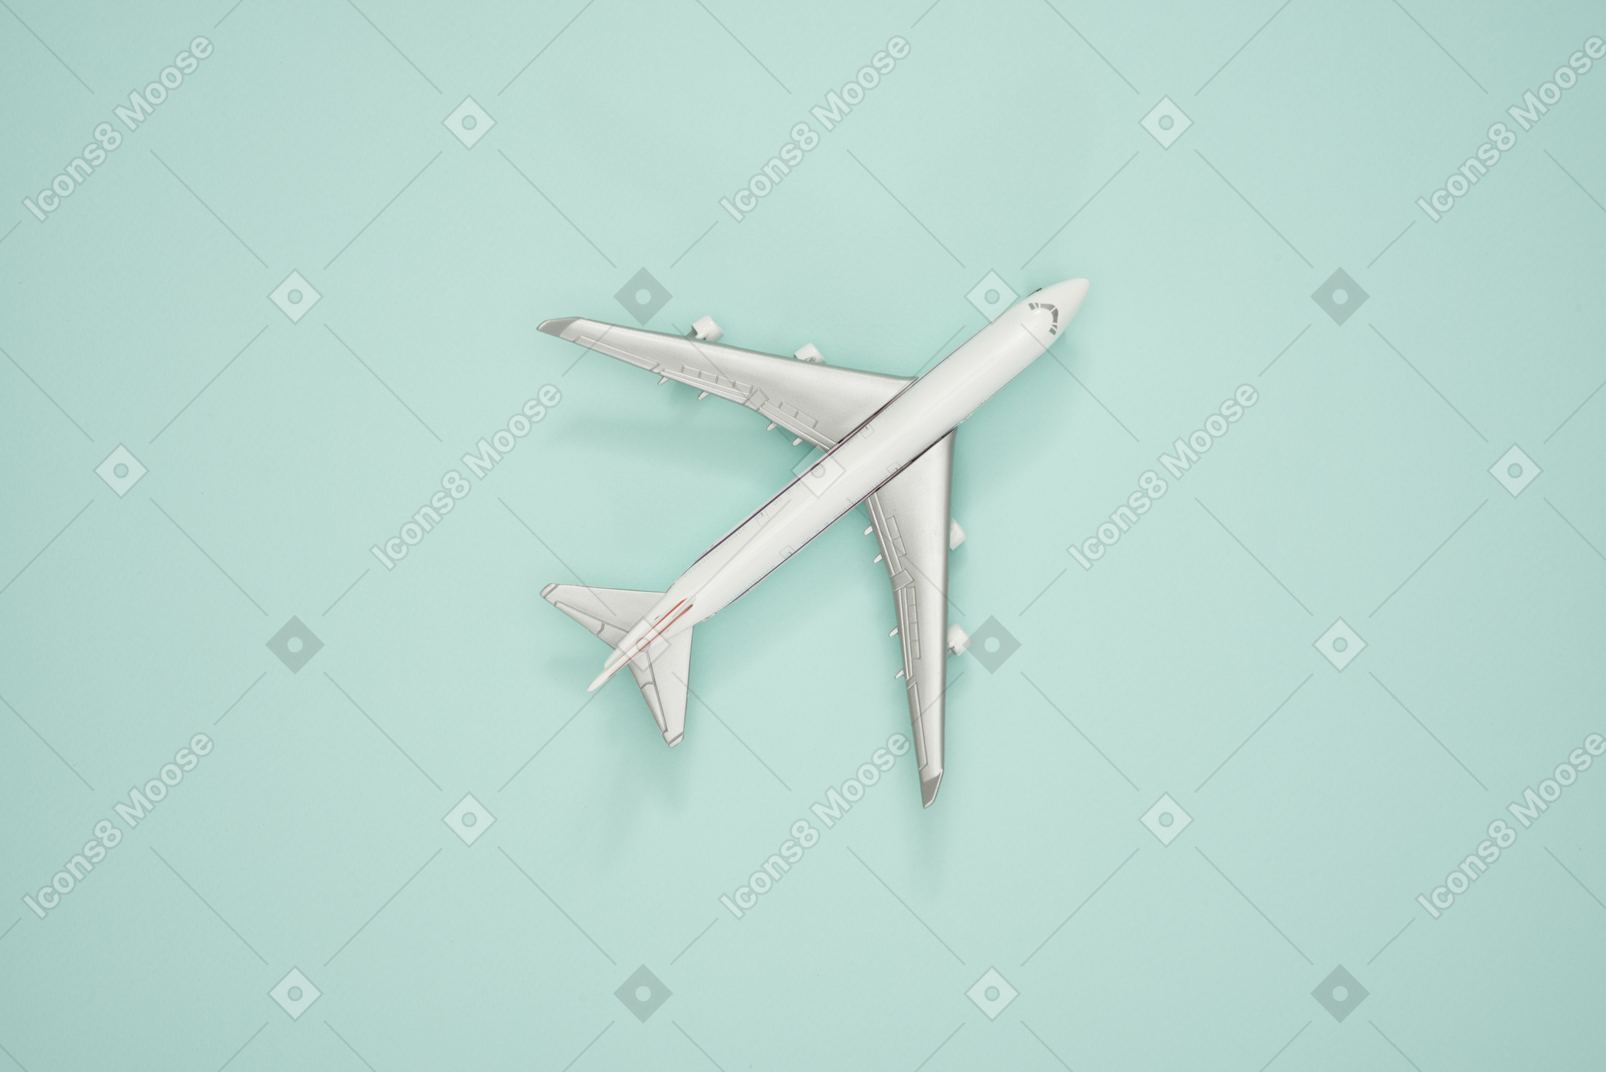 Airplane scale model on a turquoise background